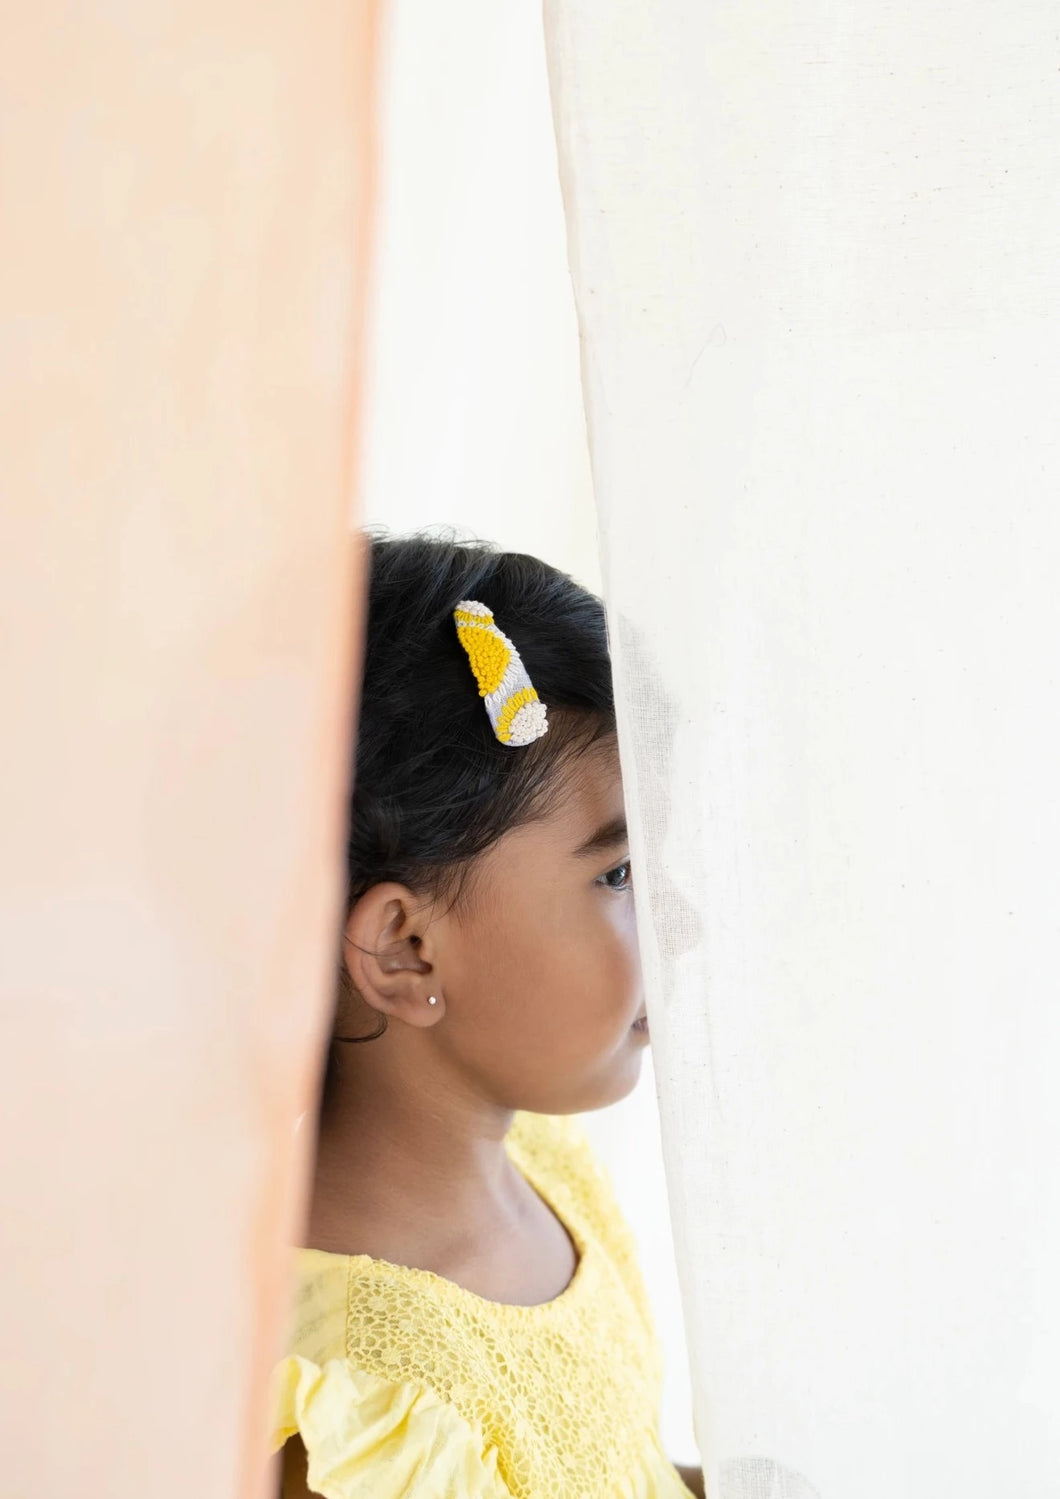 A beautiful image of child, partly visible between curtains who is wearing Embroidery Tic Tac Hair Clips as hair accessories